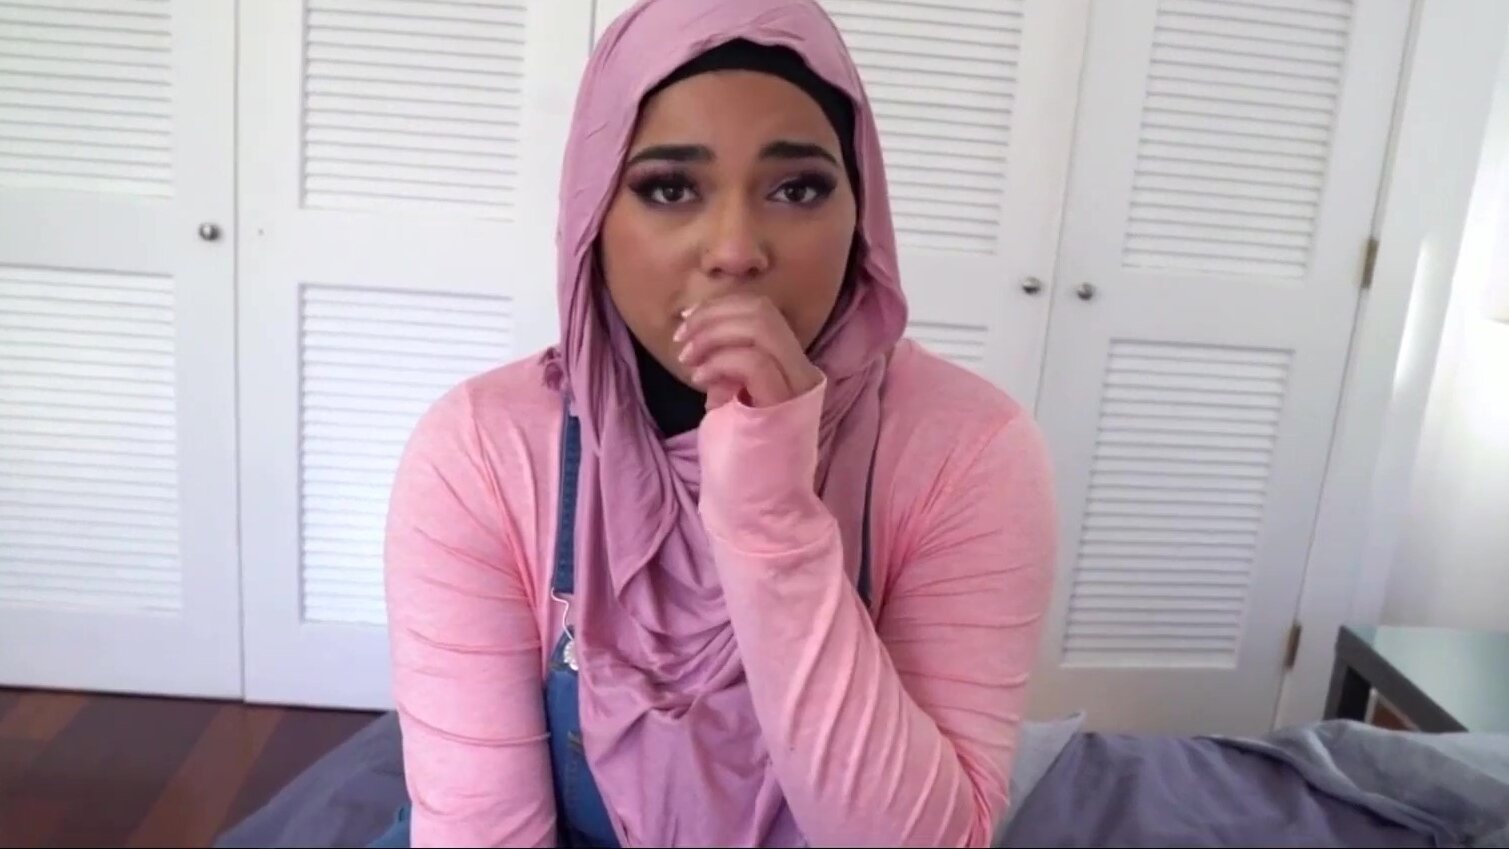 Shy Curvy Busty Muslim Teen In Hijab Asked Her Step-cousin To Take Her Virginity pic picture